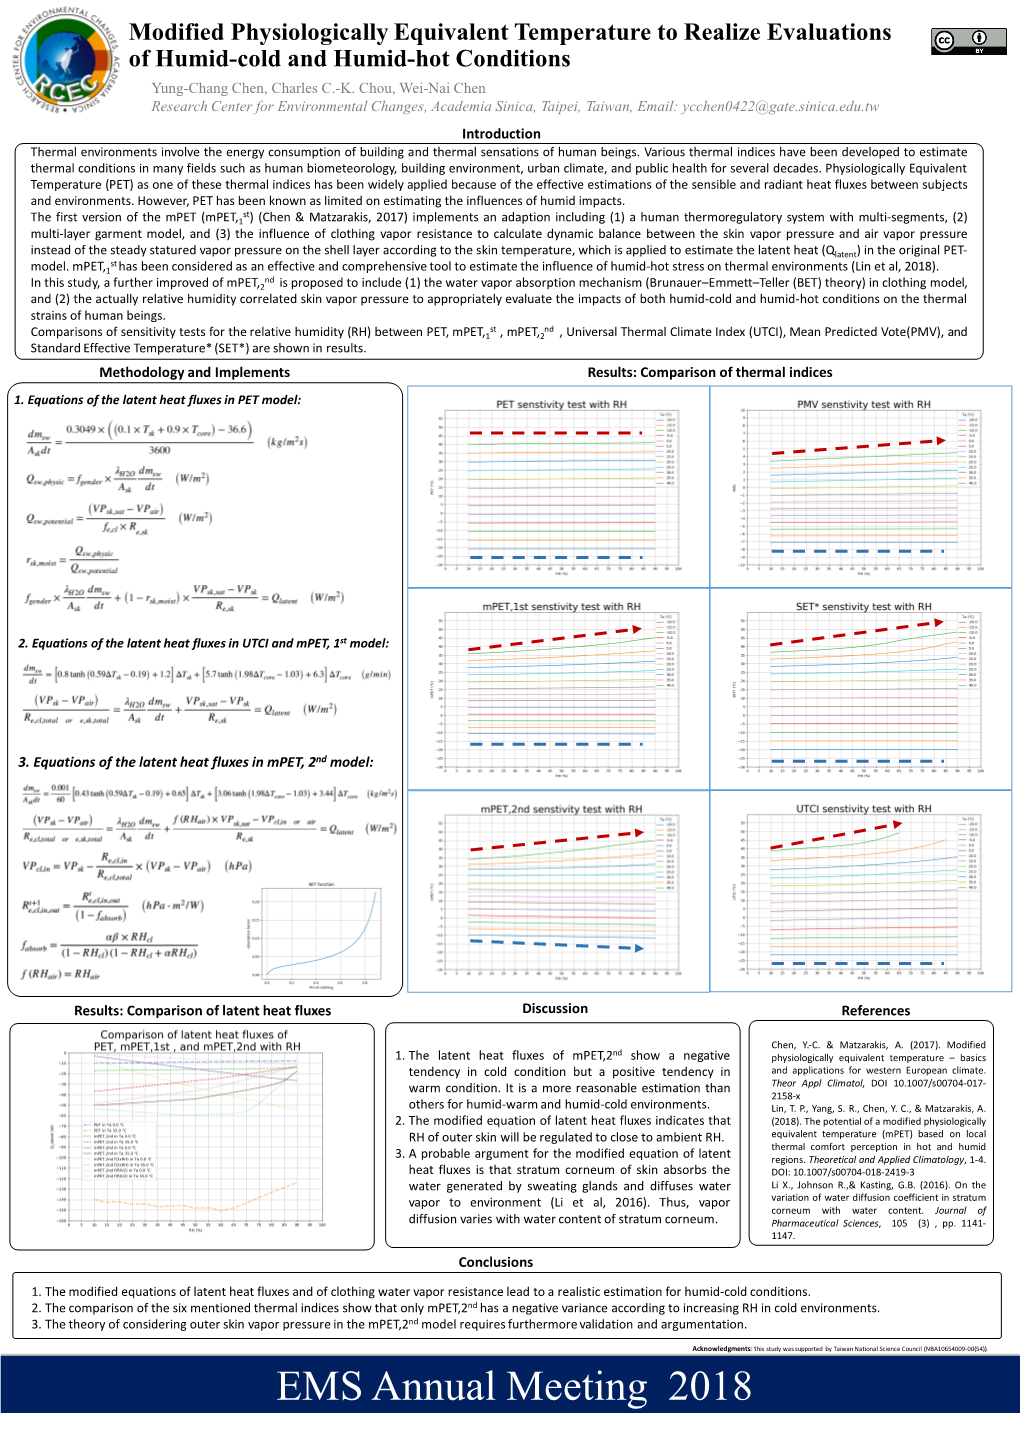 Modified Physiologically Equivalent Temperature to Realize Evaluations of Humid-Cold and Humid-Hot Conditions Yung-Chang Chen, Charles C.-K